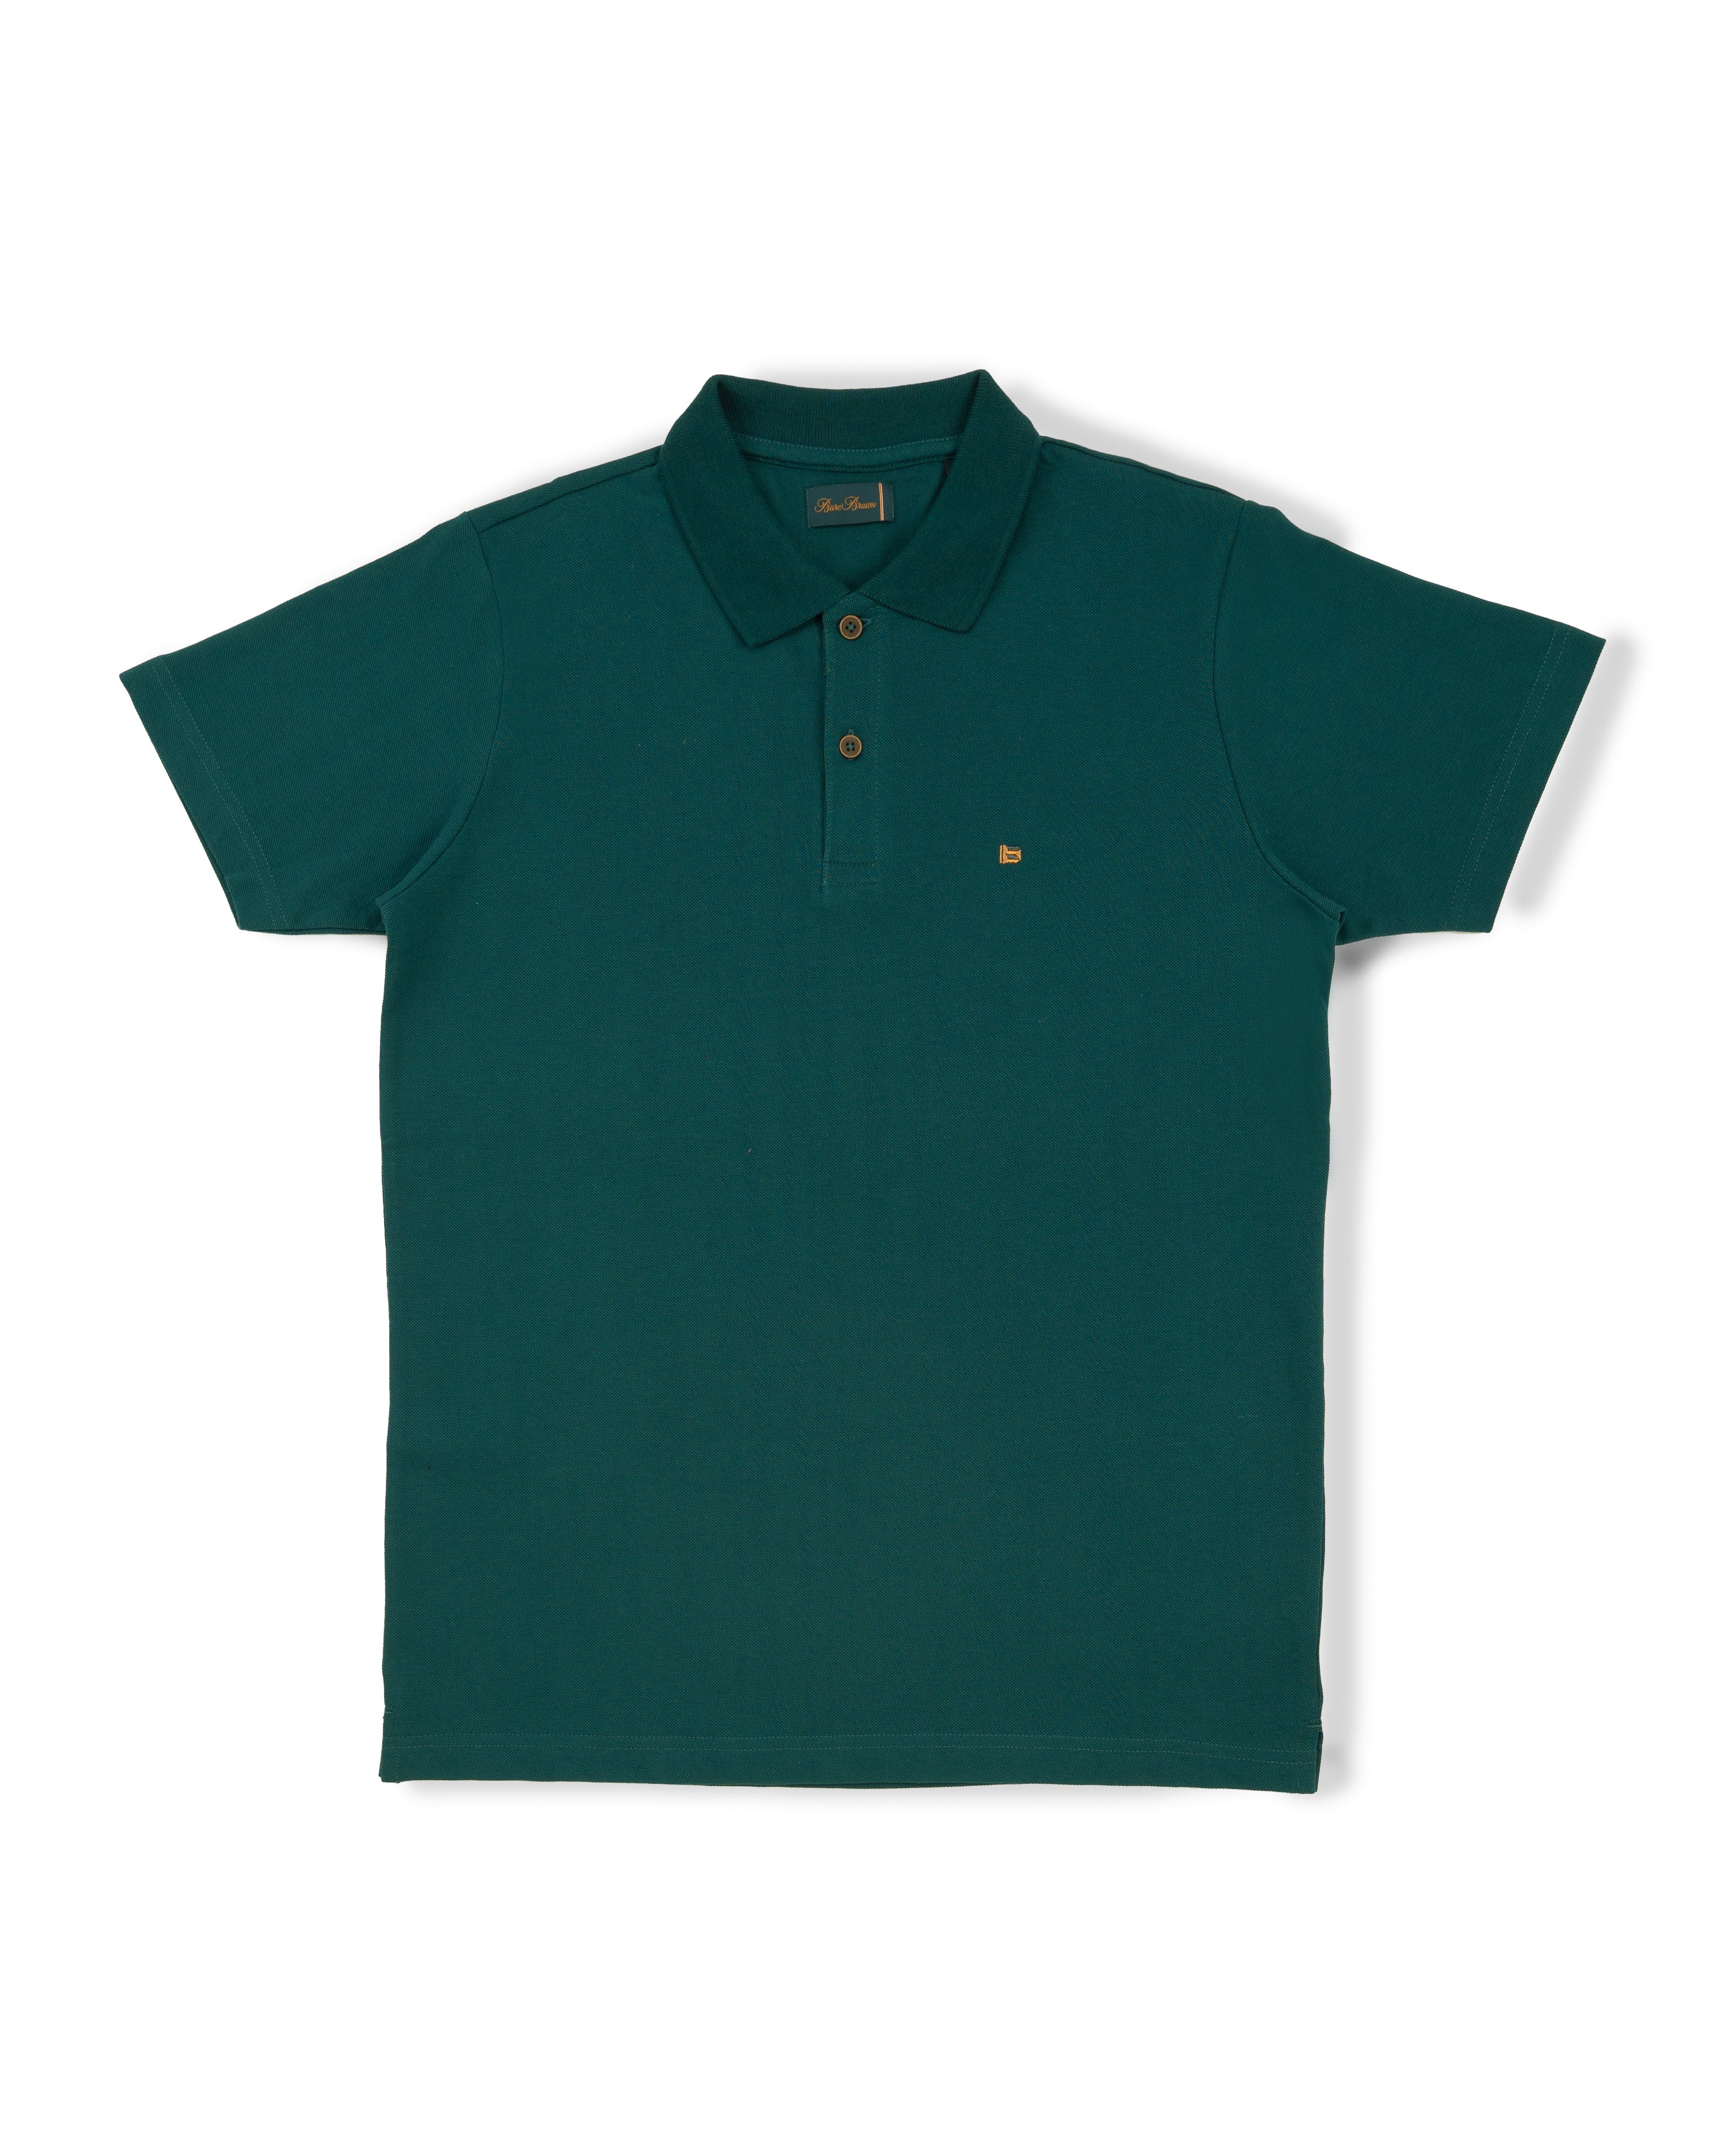 Bare Brown Teal Slim Fit Lightweight Polo T-Shirt